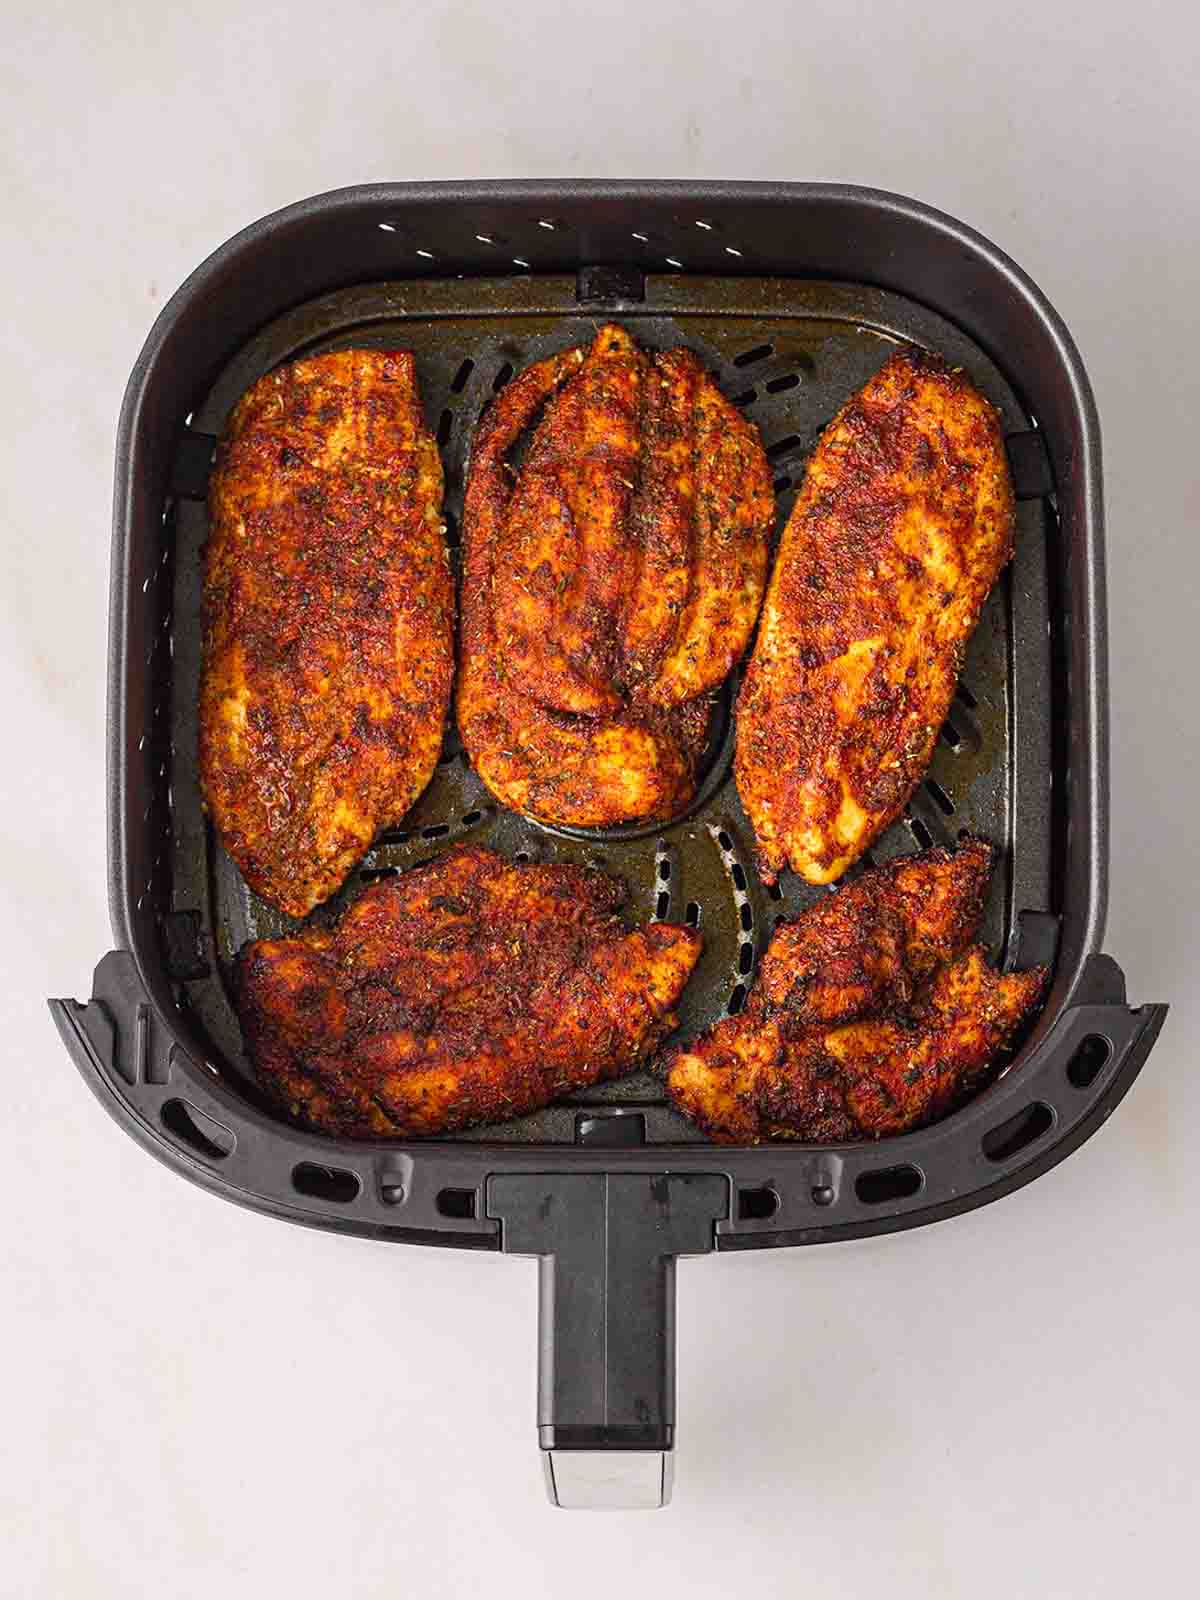 Five chicken cutlets in an air fryer, cooked.